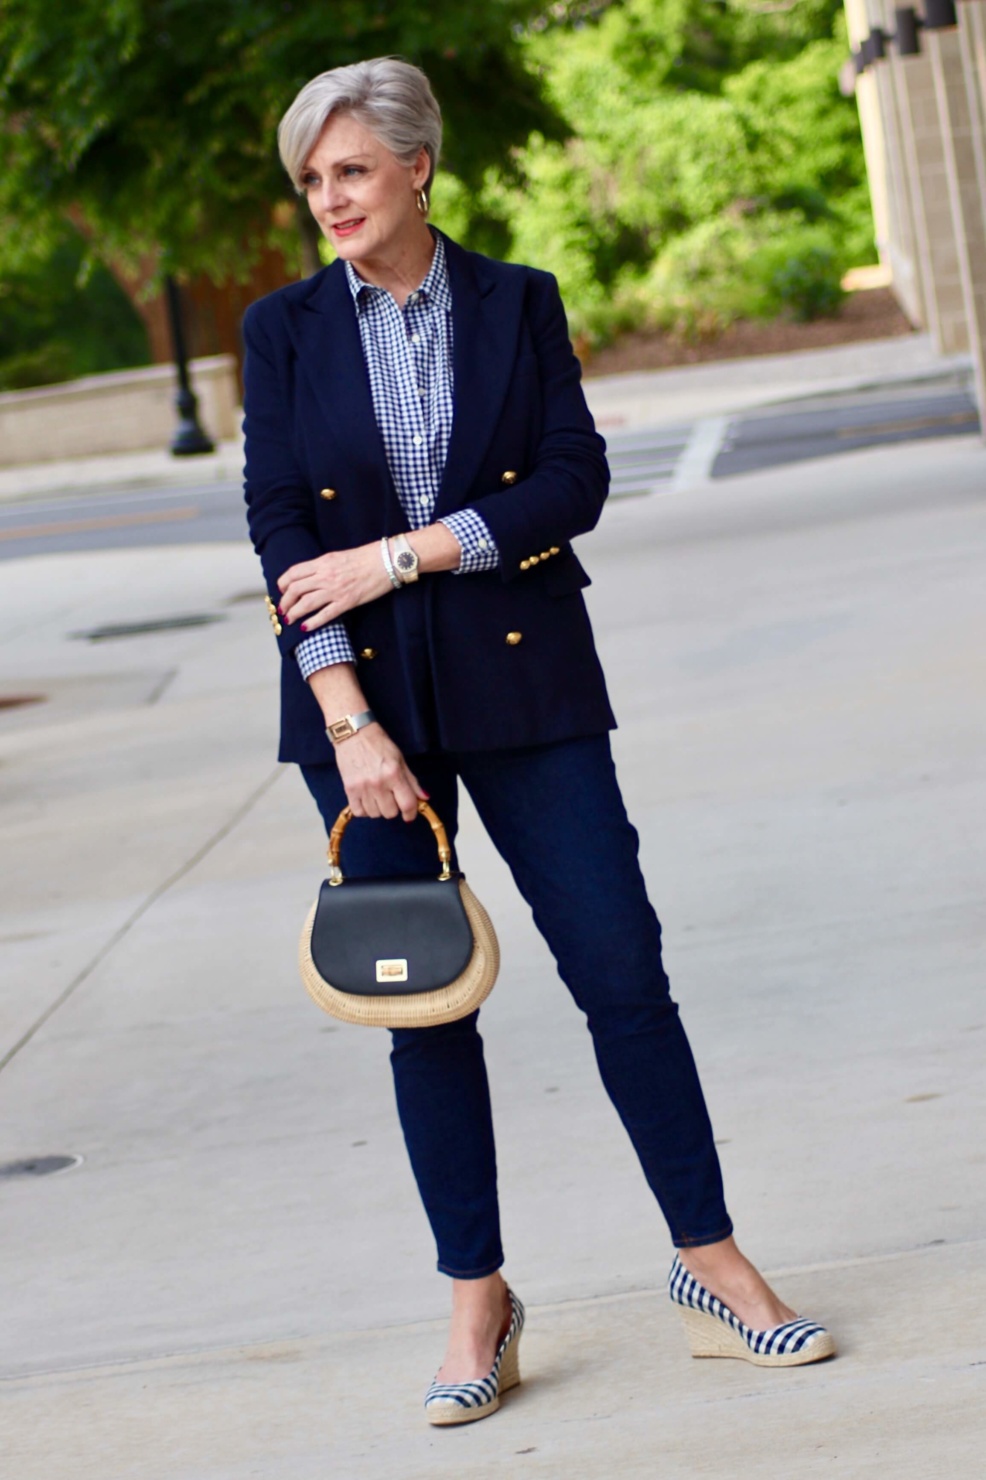 beth from Style at a Certain Age wears a lightweight blazer, gingham shirt, skinny jeans, espadrilles and wicker handbag